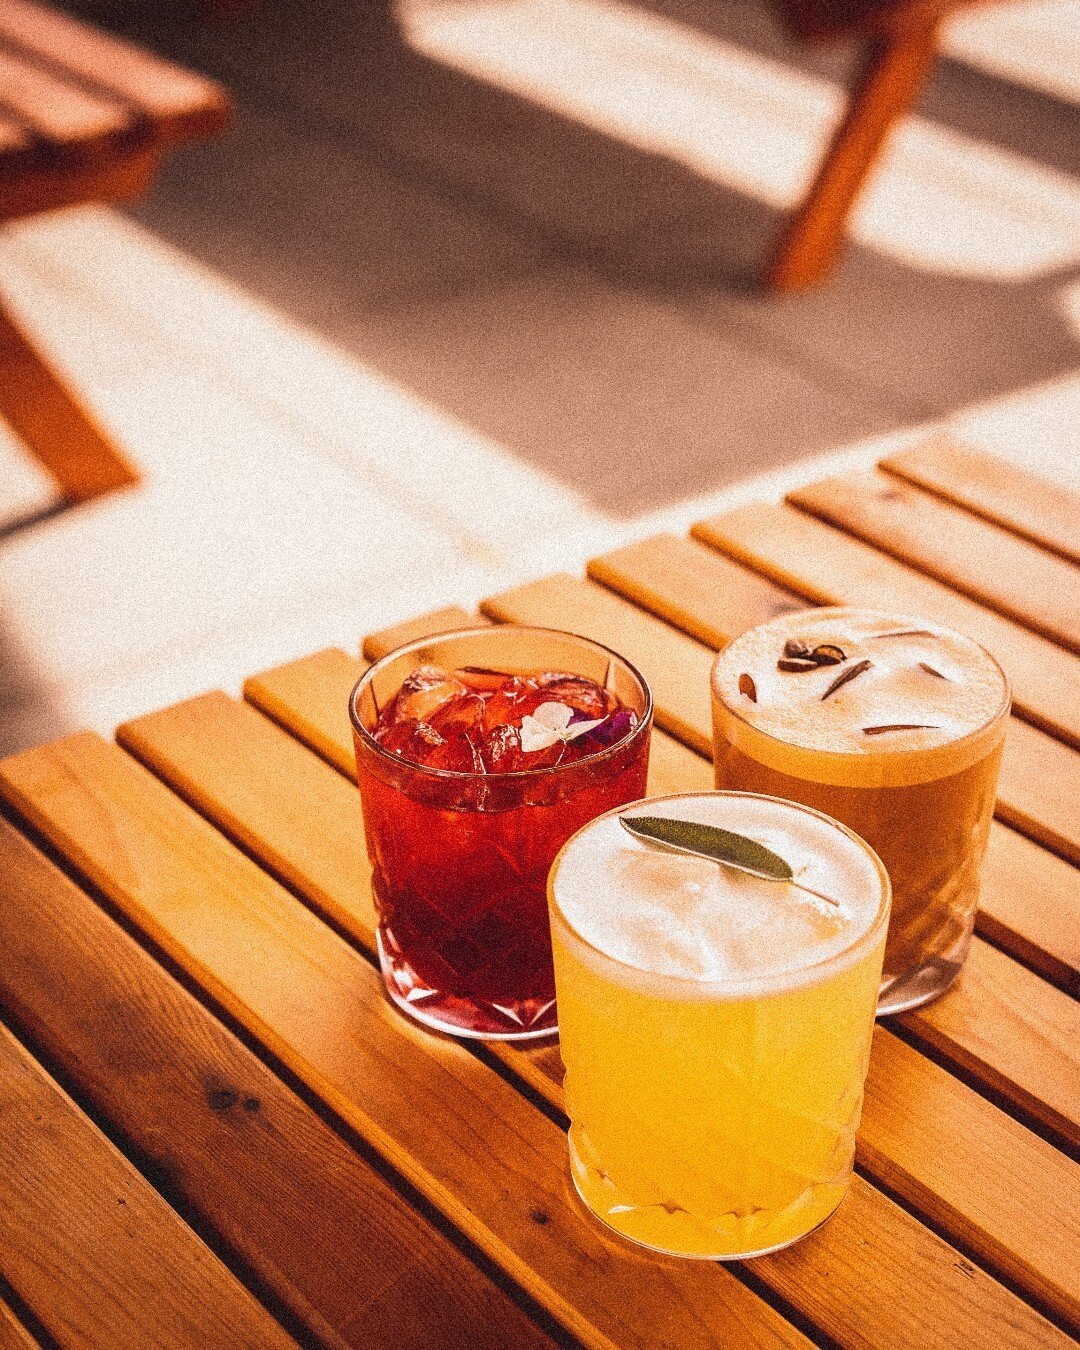 Let's cheers to sipping on some refreshing patio cocktails! Grab your friends, join us in the sun, and get your weekend started right!